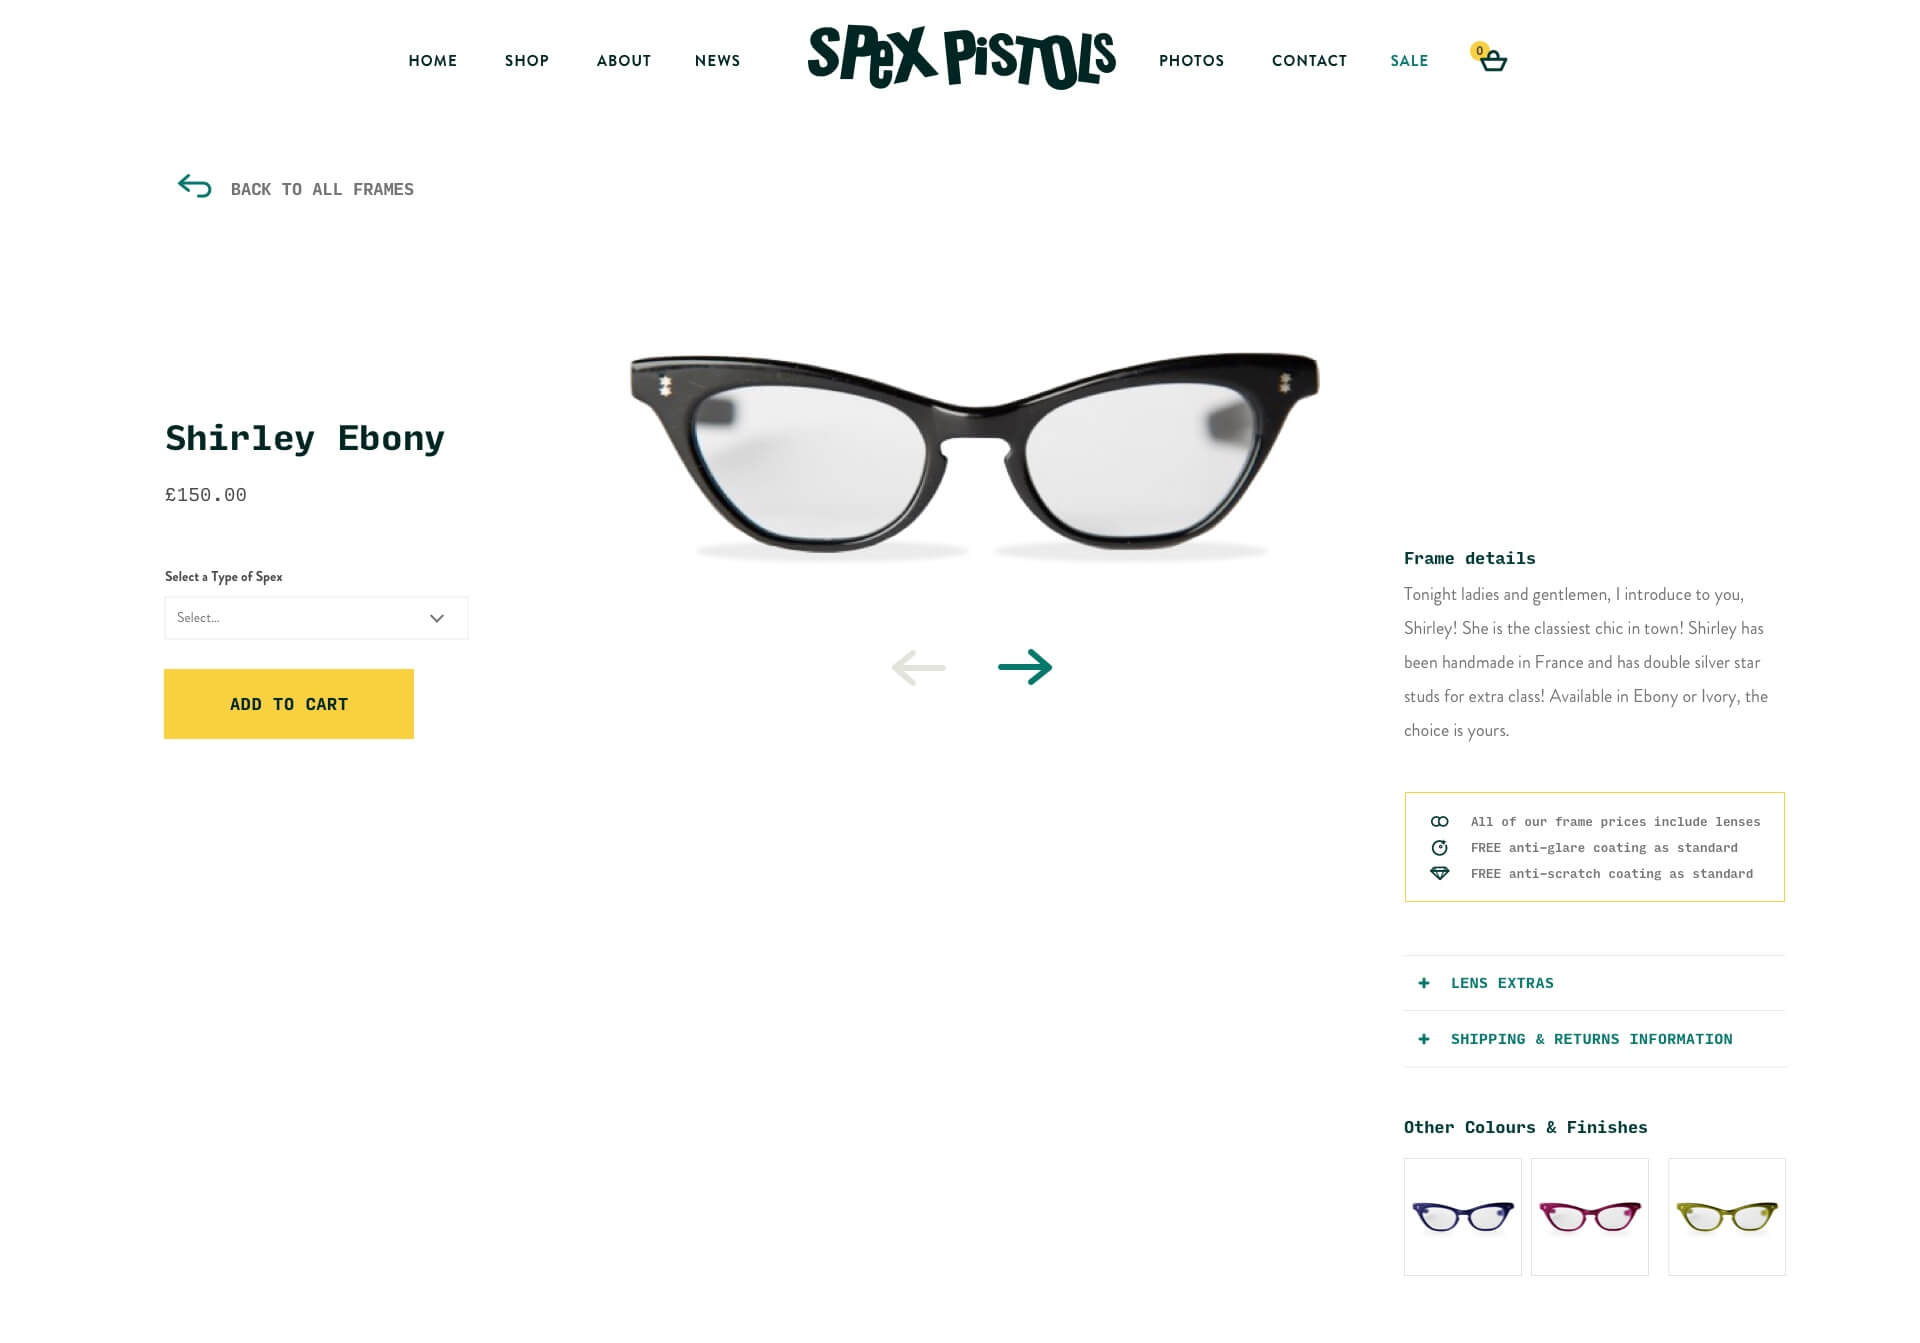 Individual spectacles page on the e-commerce website for Spex Pistols.